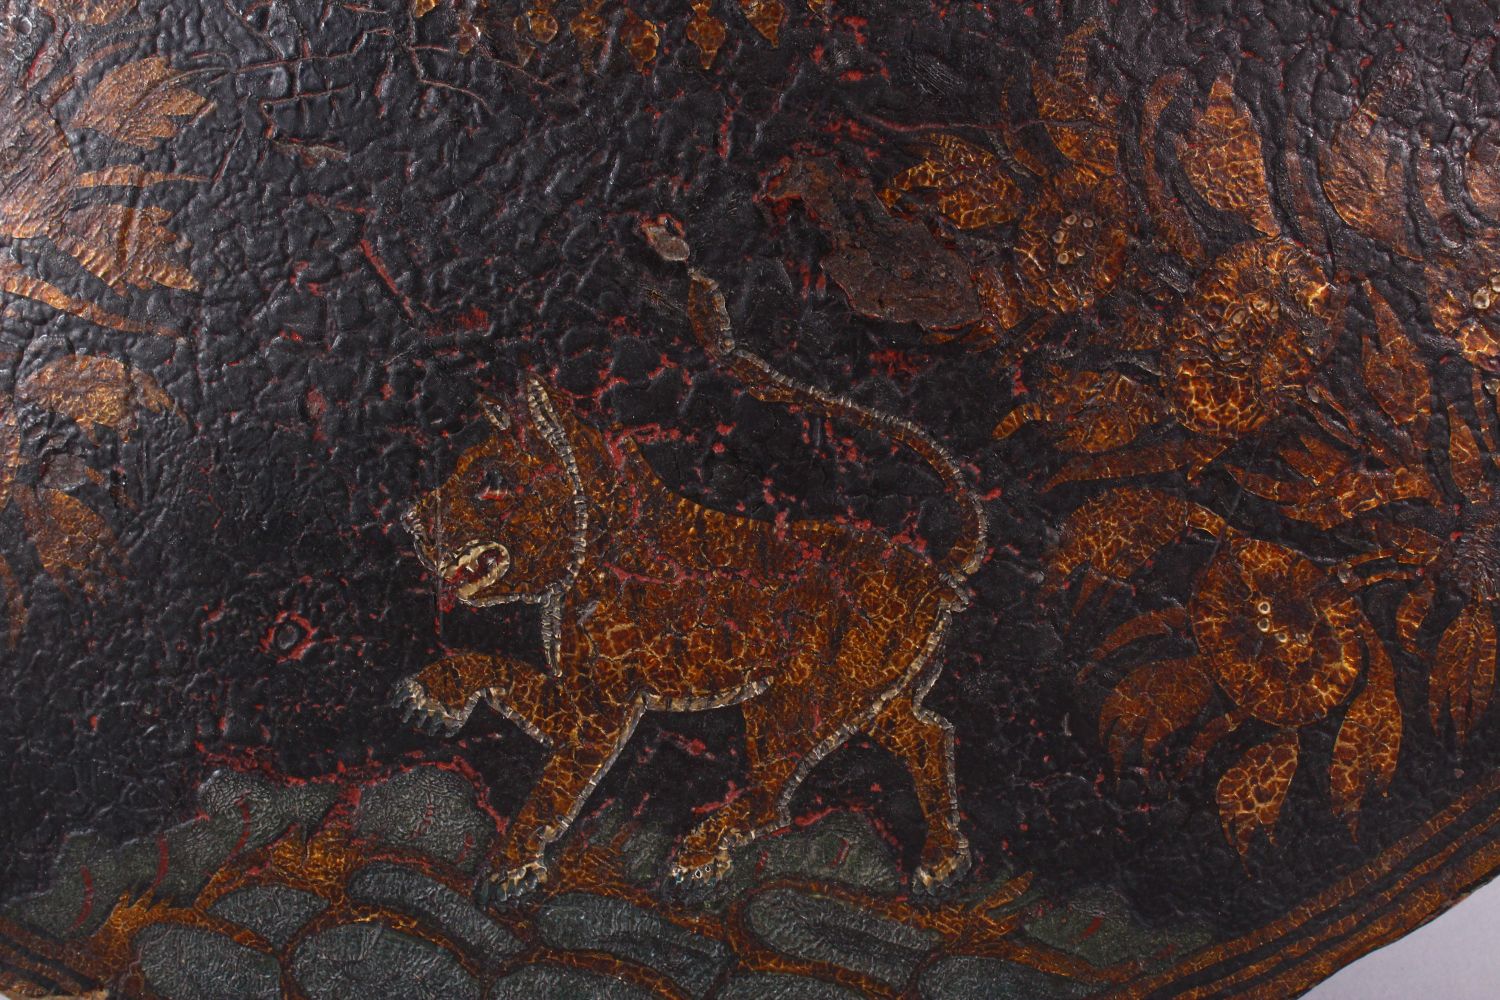 A FINE 18TH/19TH CENTURY INDIAN PAINTED LACQUER LEATHER SHIELD, decorated with a band of tigers, - Image 2 of 10